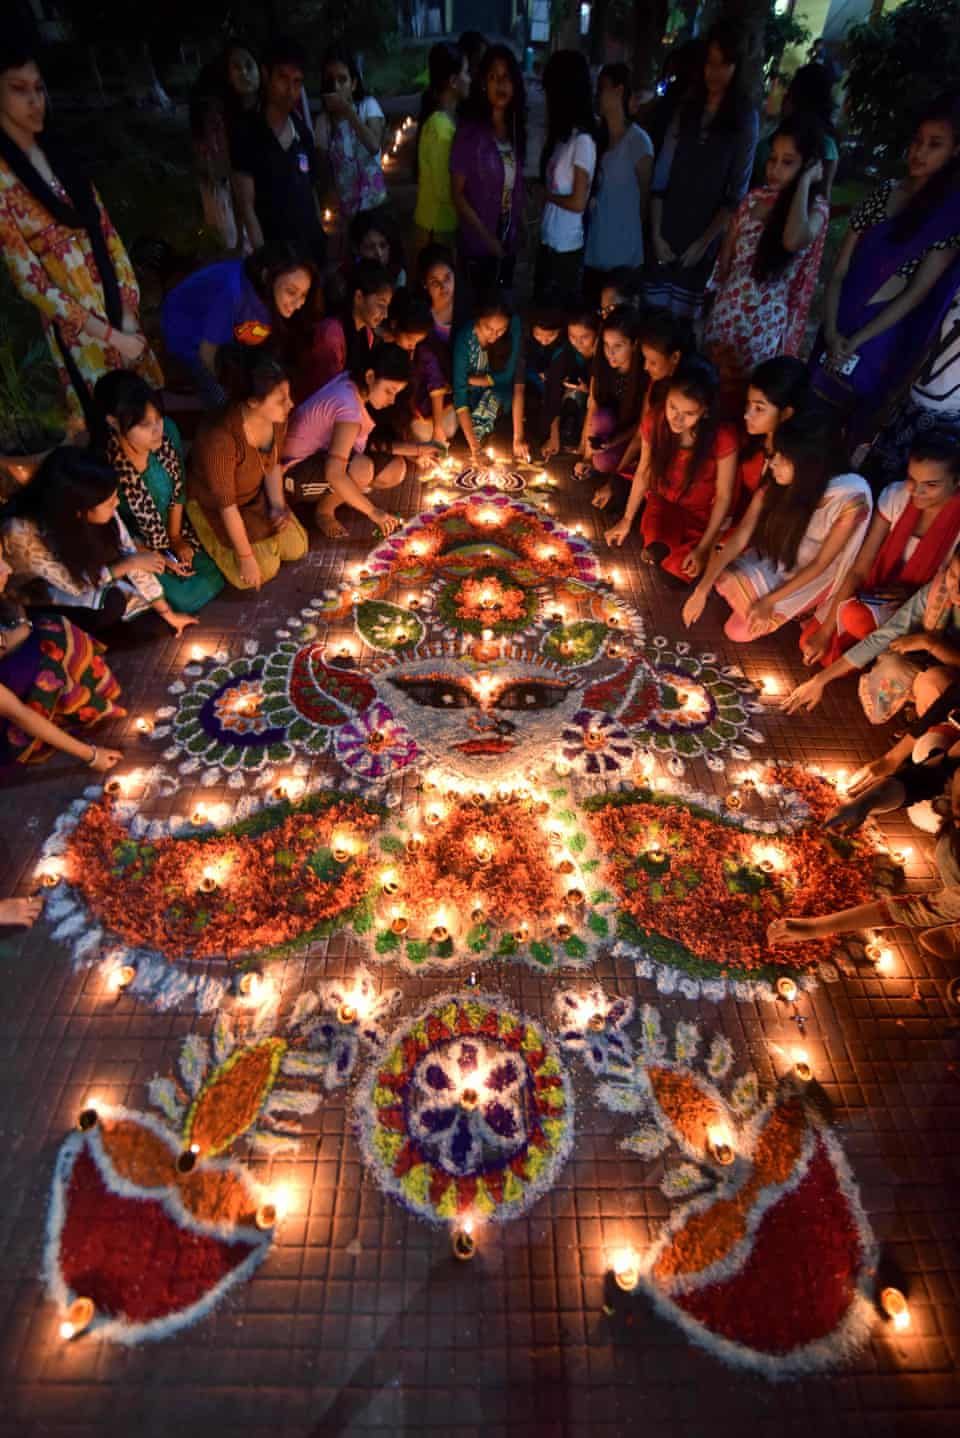 Diwali, The Hindu Festival Of Lights – In Pictures